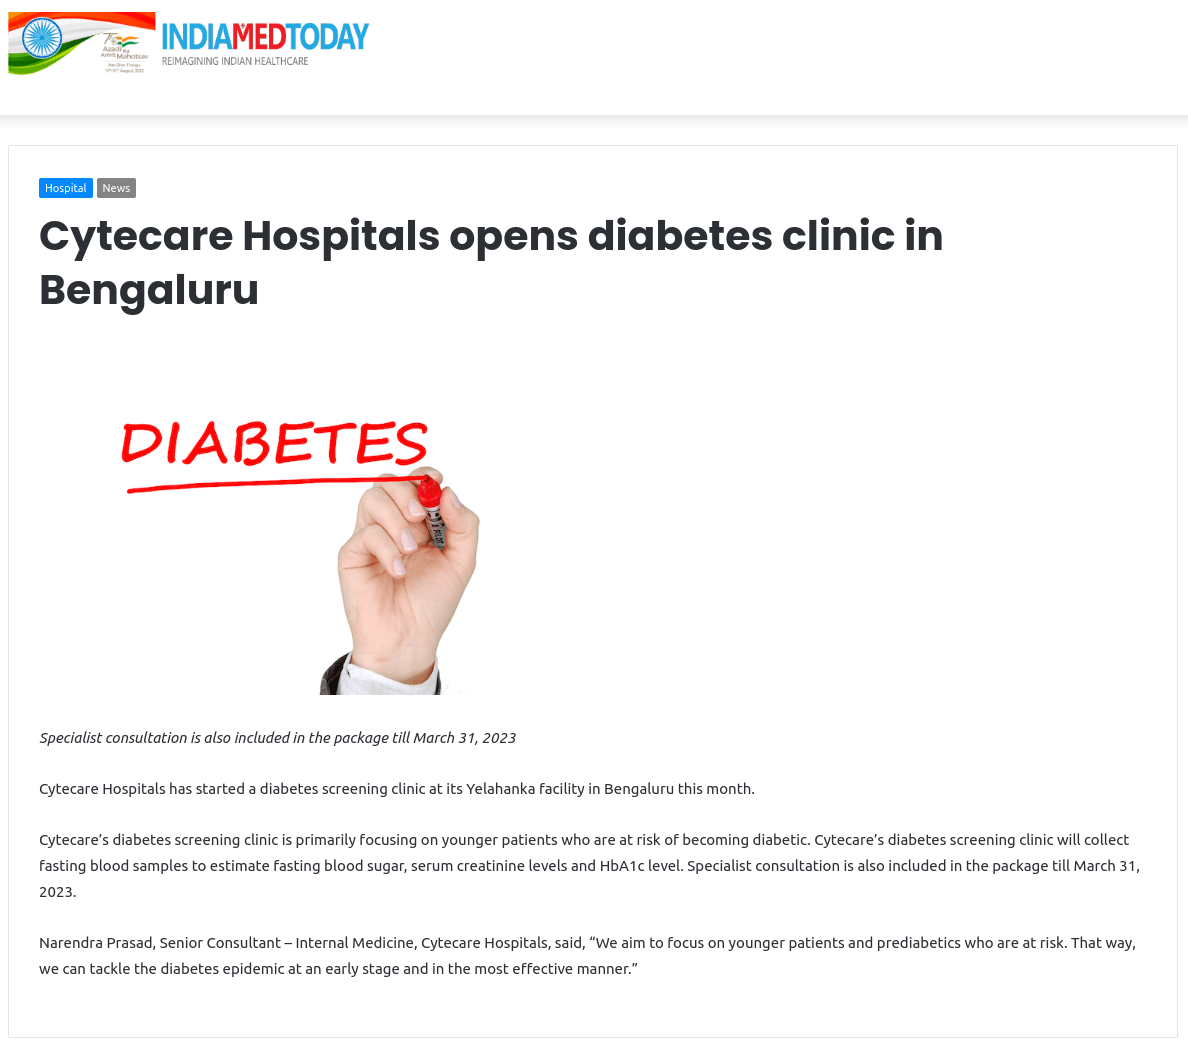 Cytecare Hospitals Opens diabetes clinic in Bengaluru